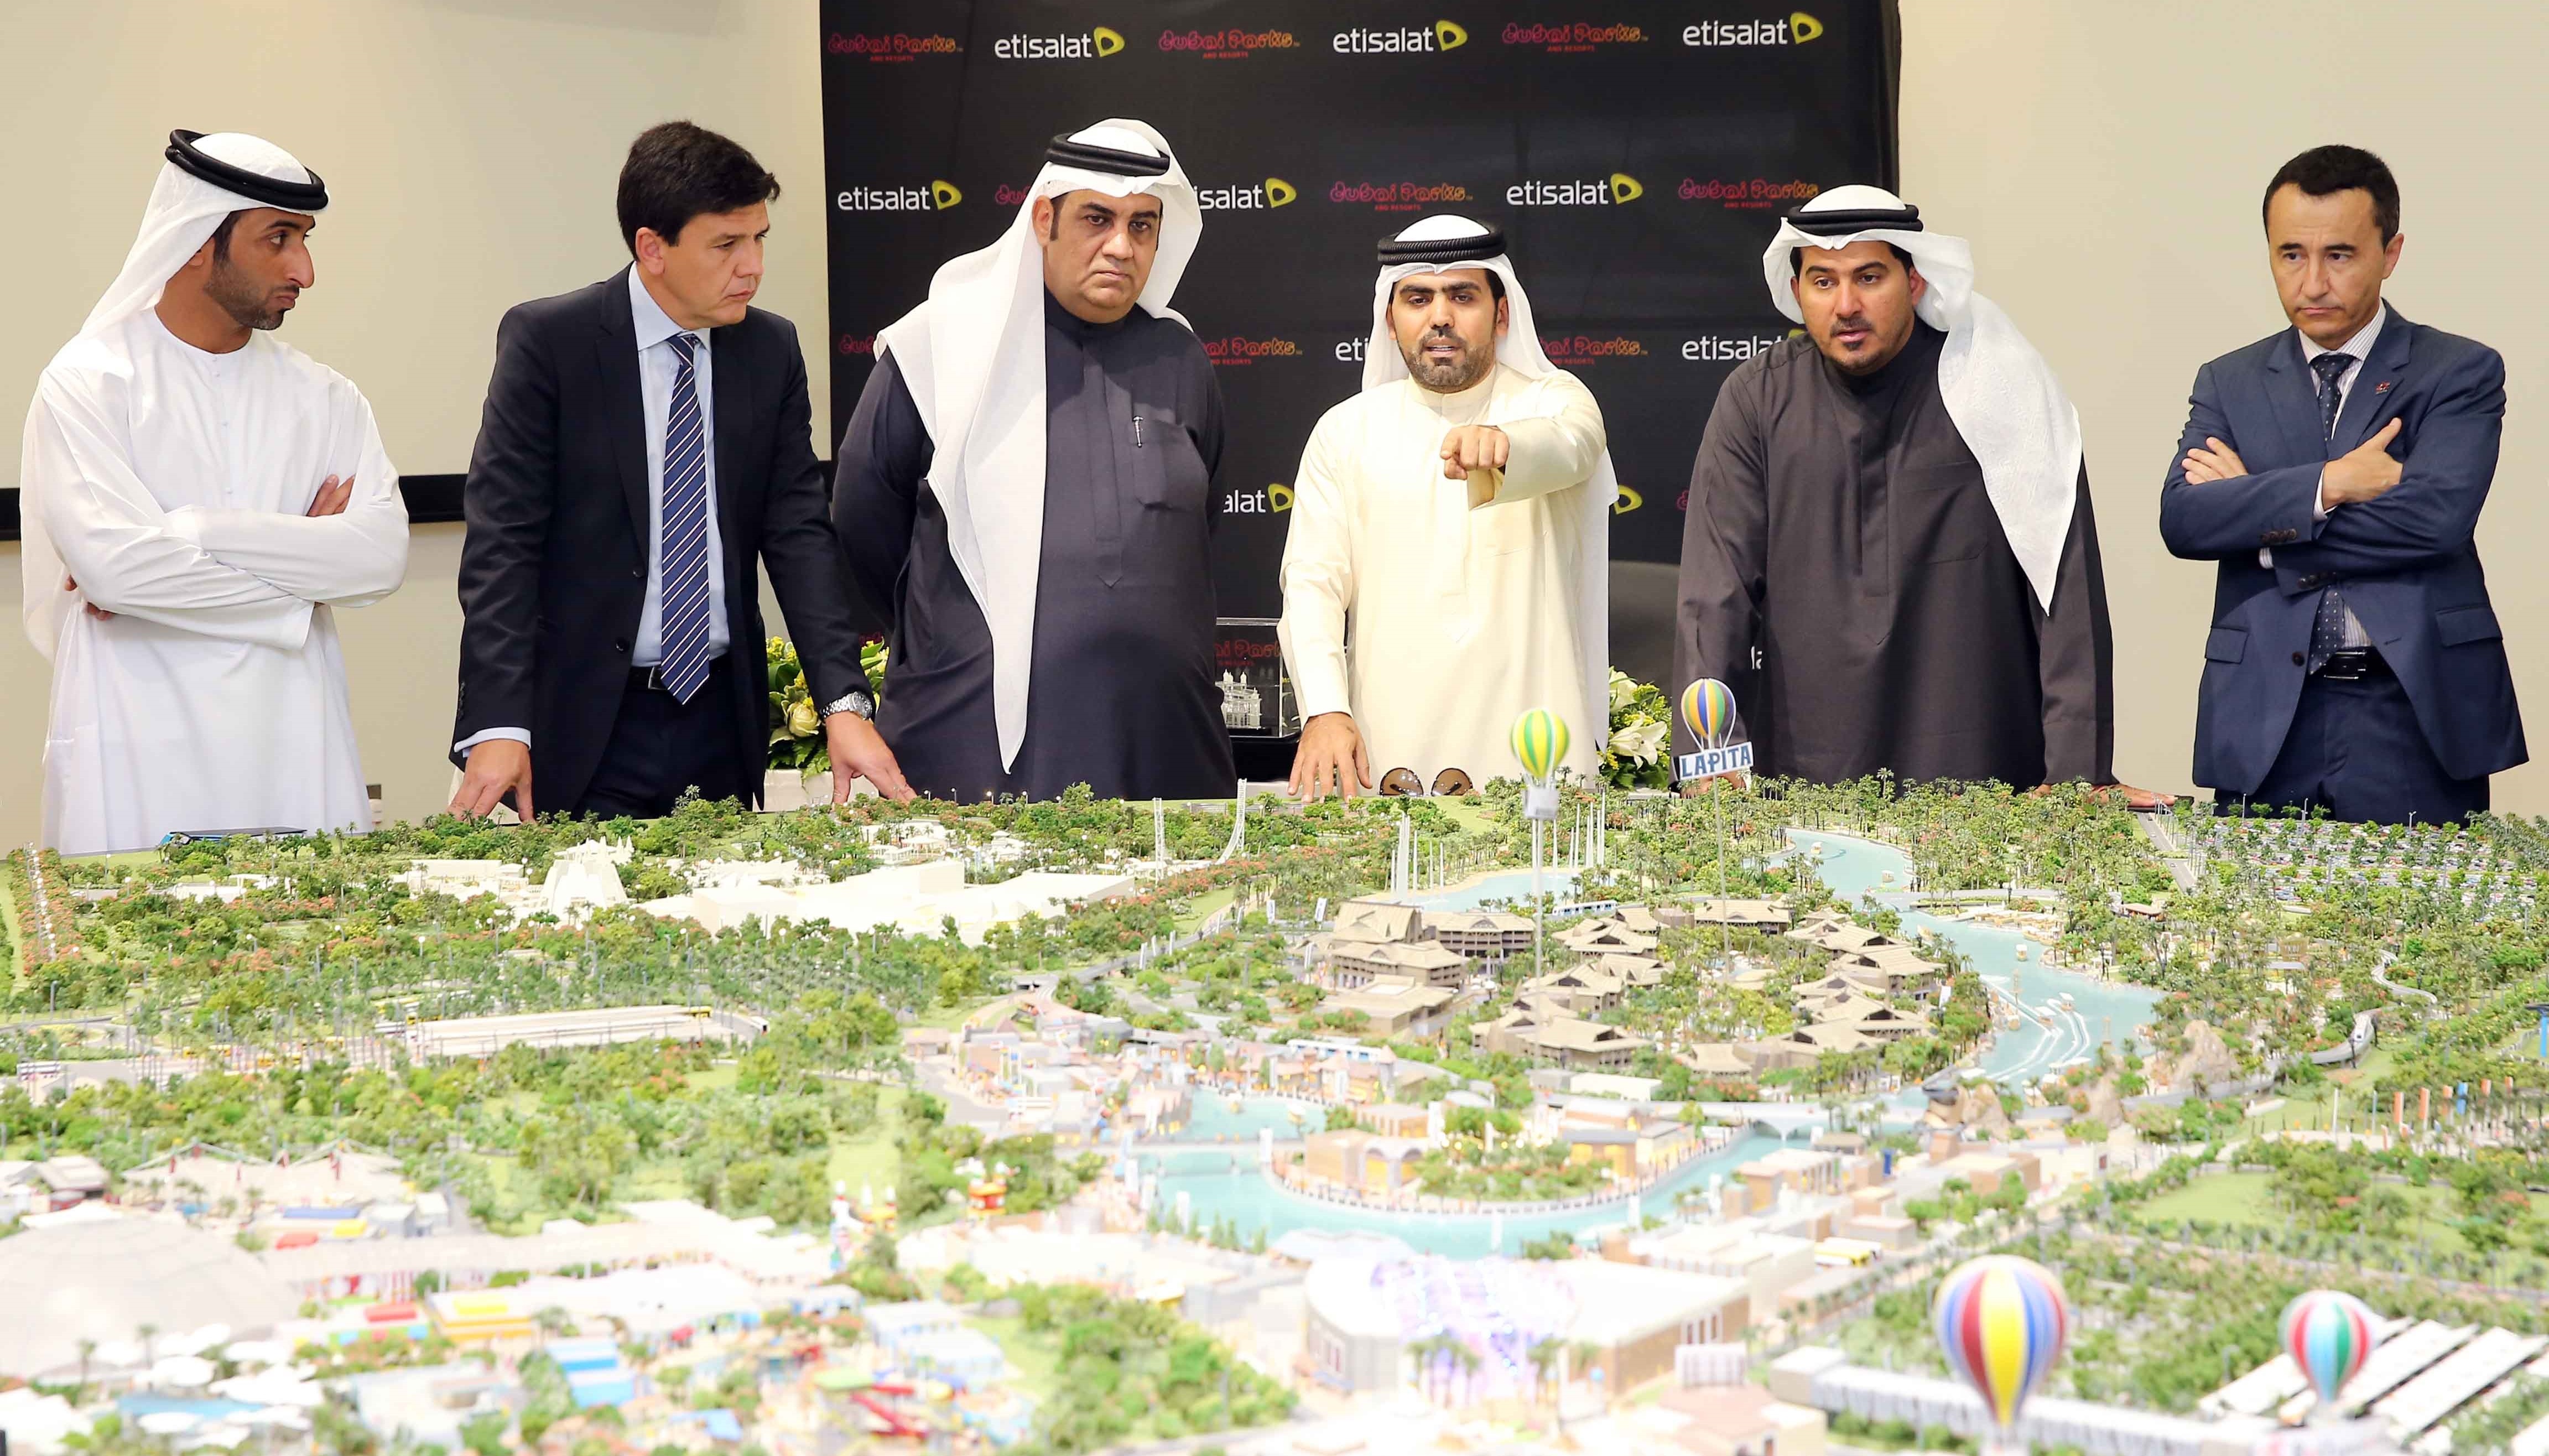 Dubai Parks to align with Etisalat for ‘smart theme park’